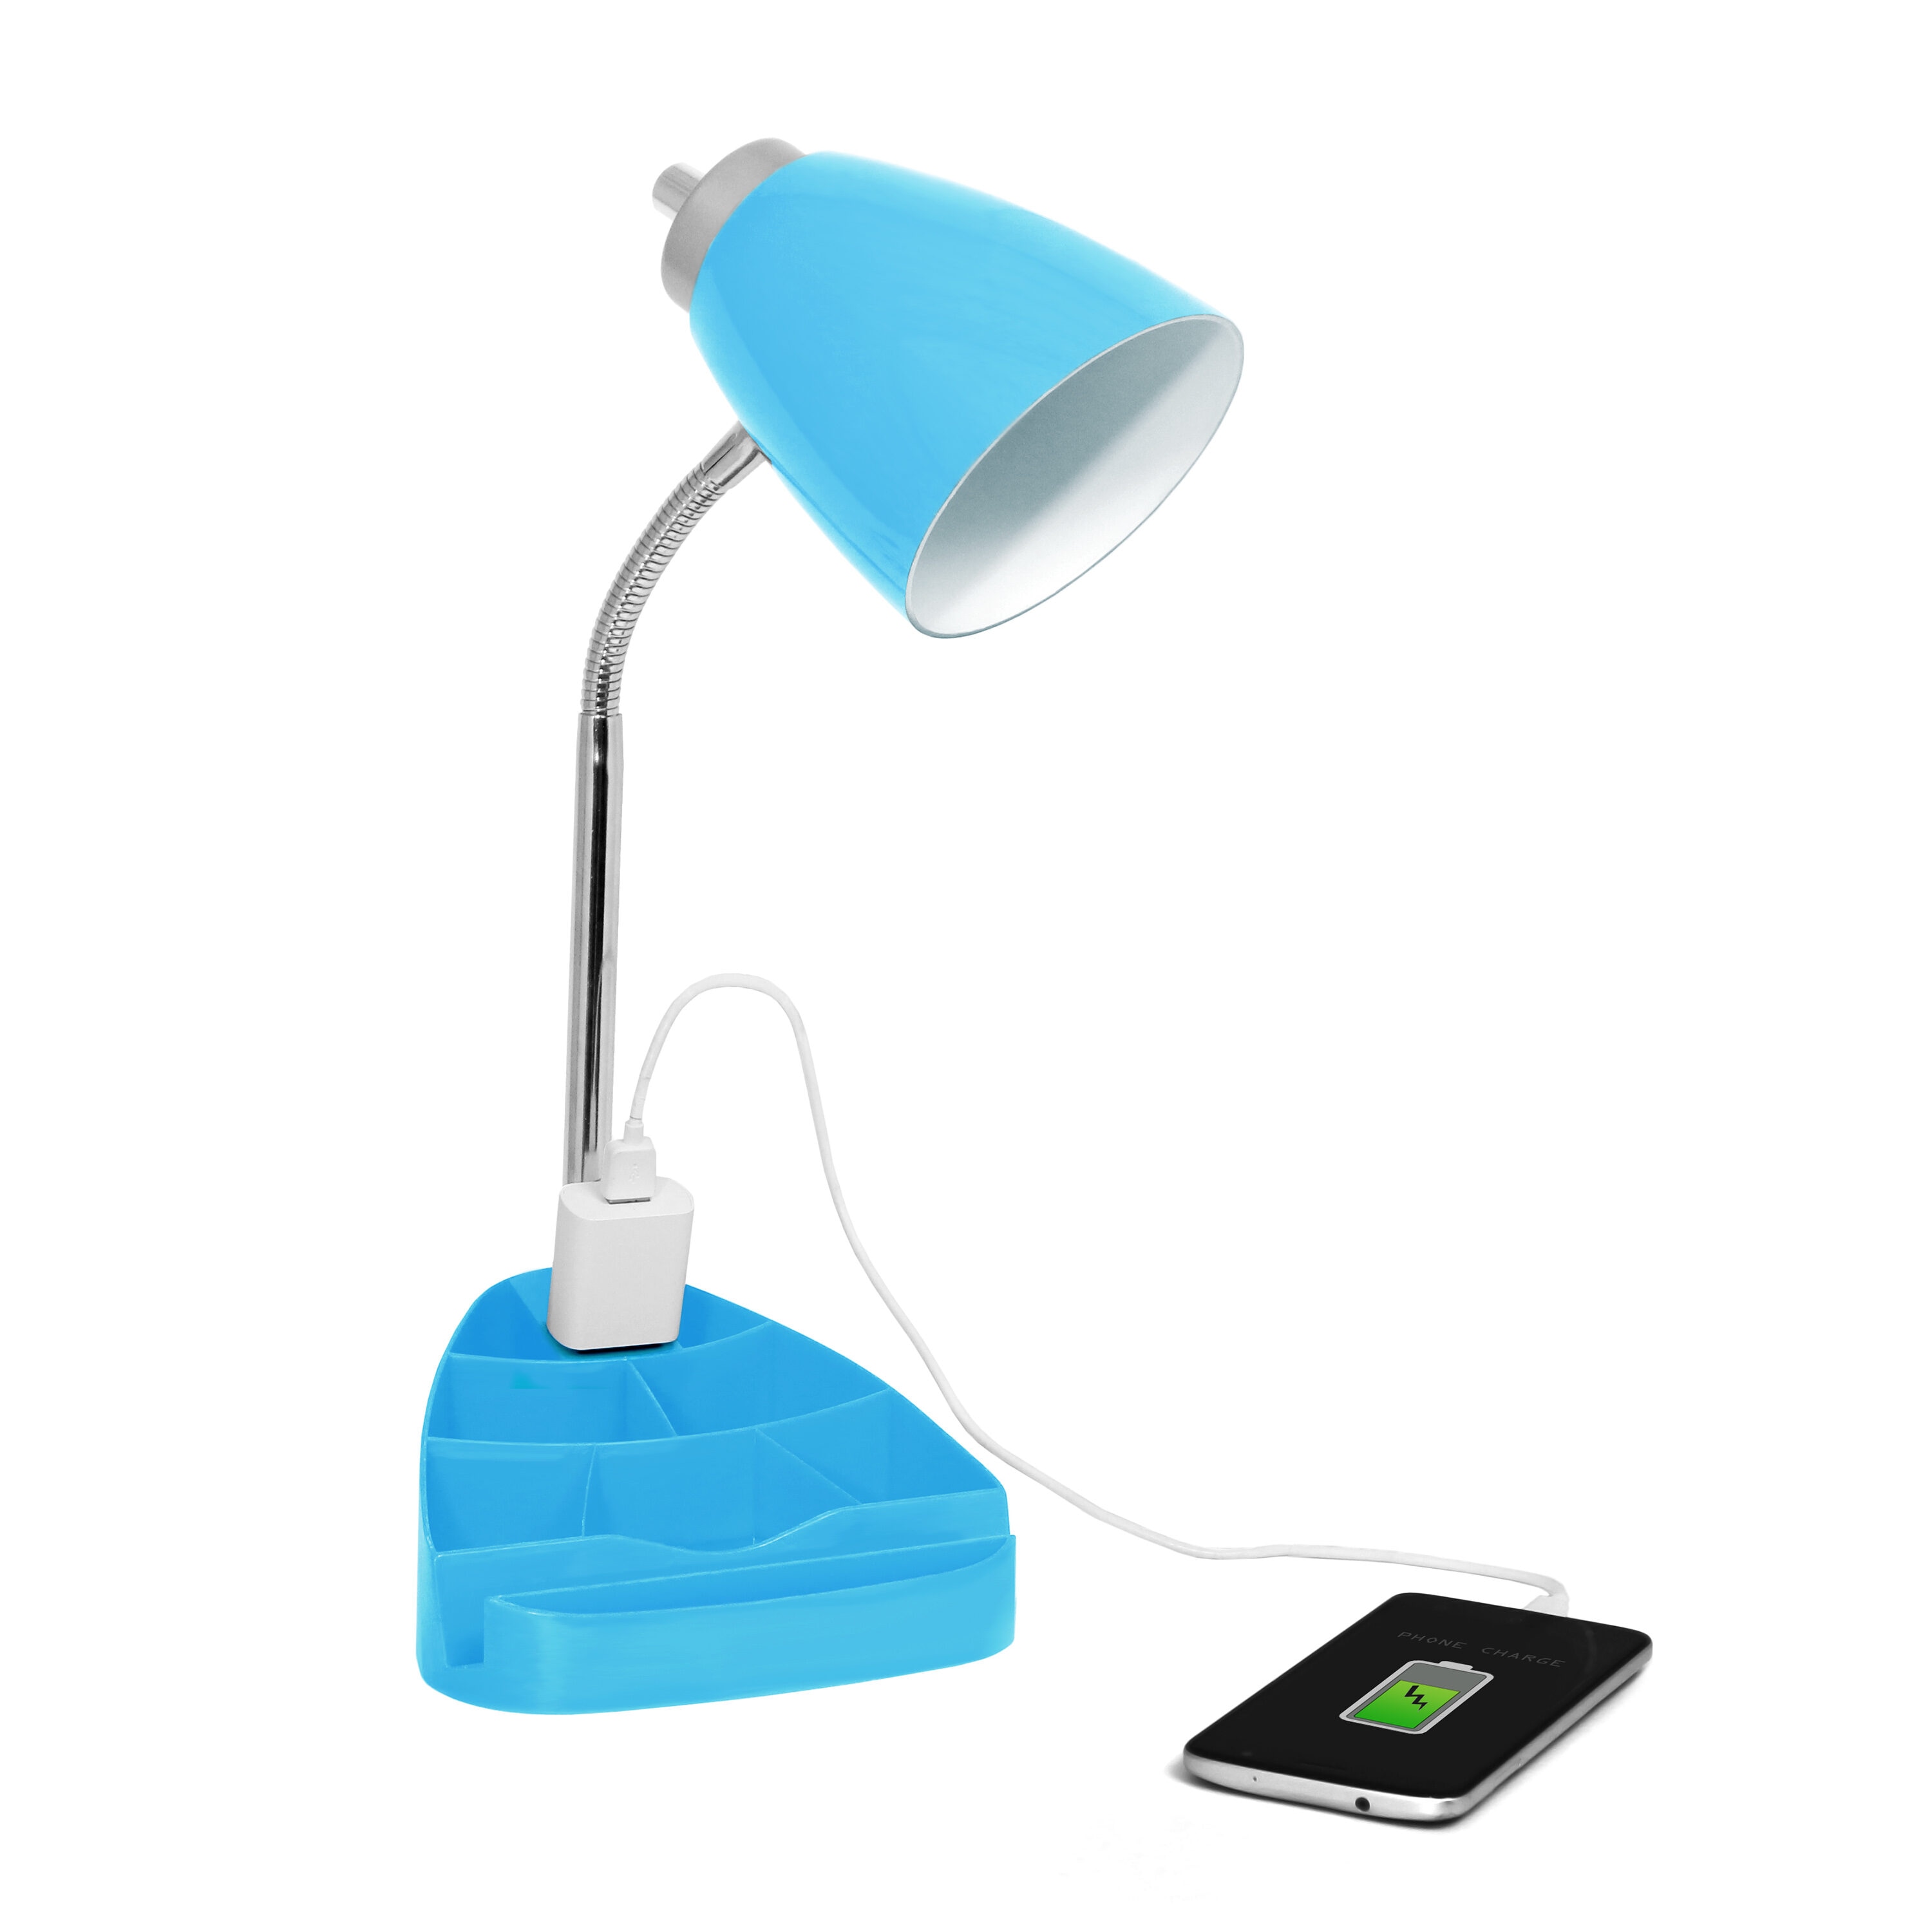 LimeLights 17.25-in Adjustable Blue Swing-arm Desk Lamp with